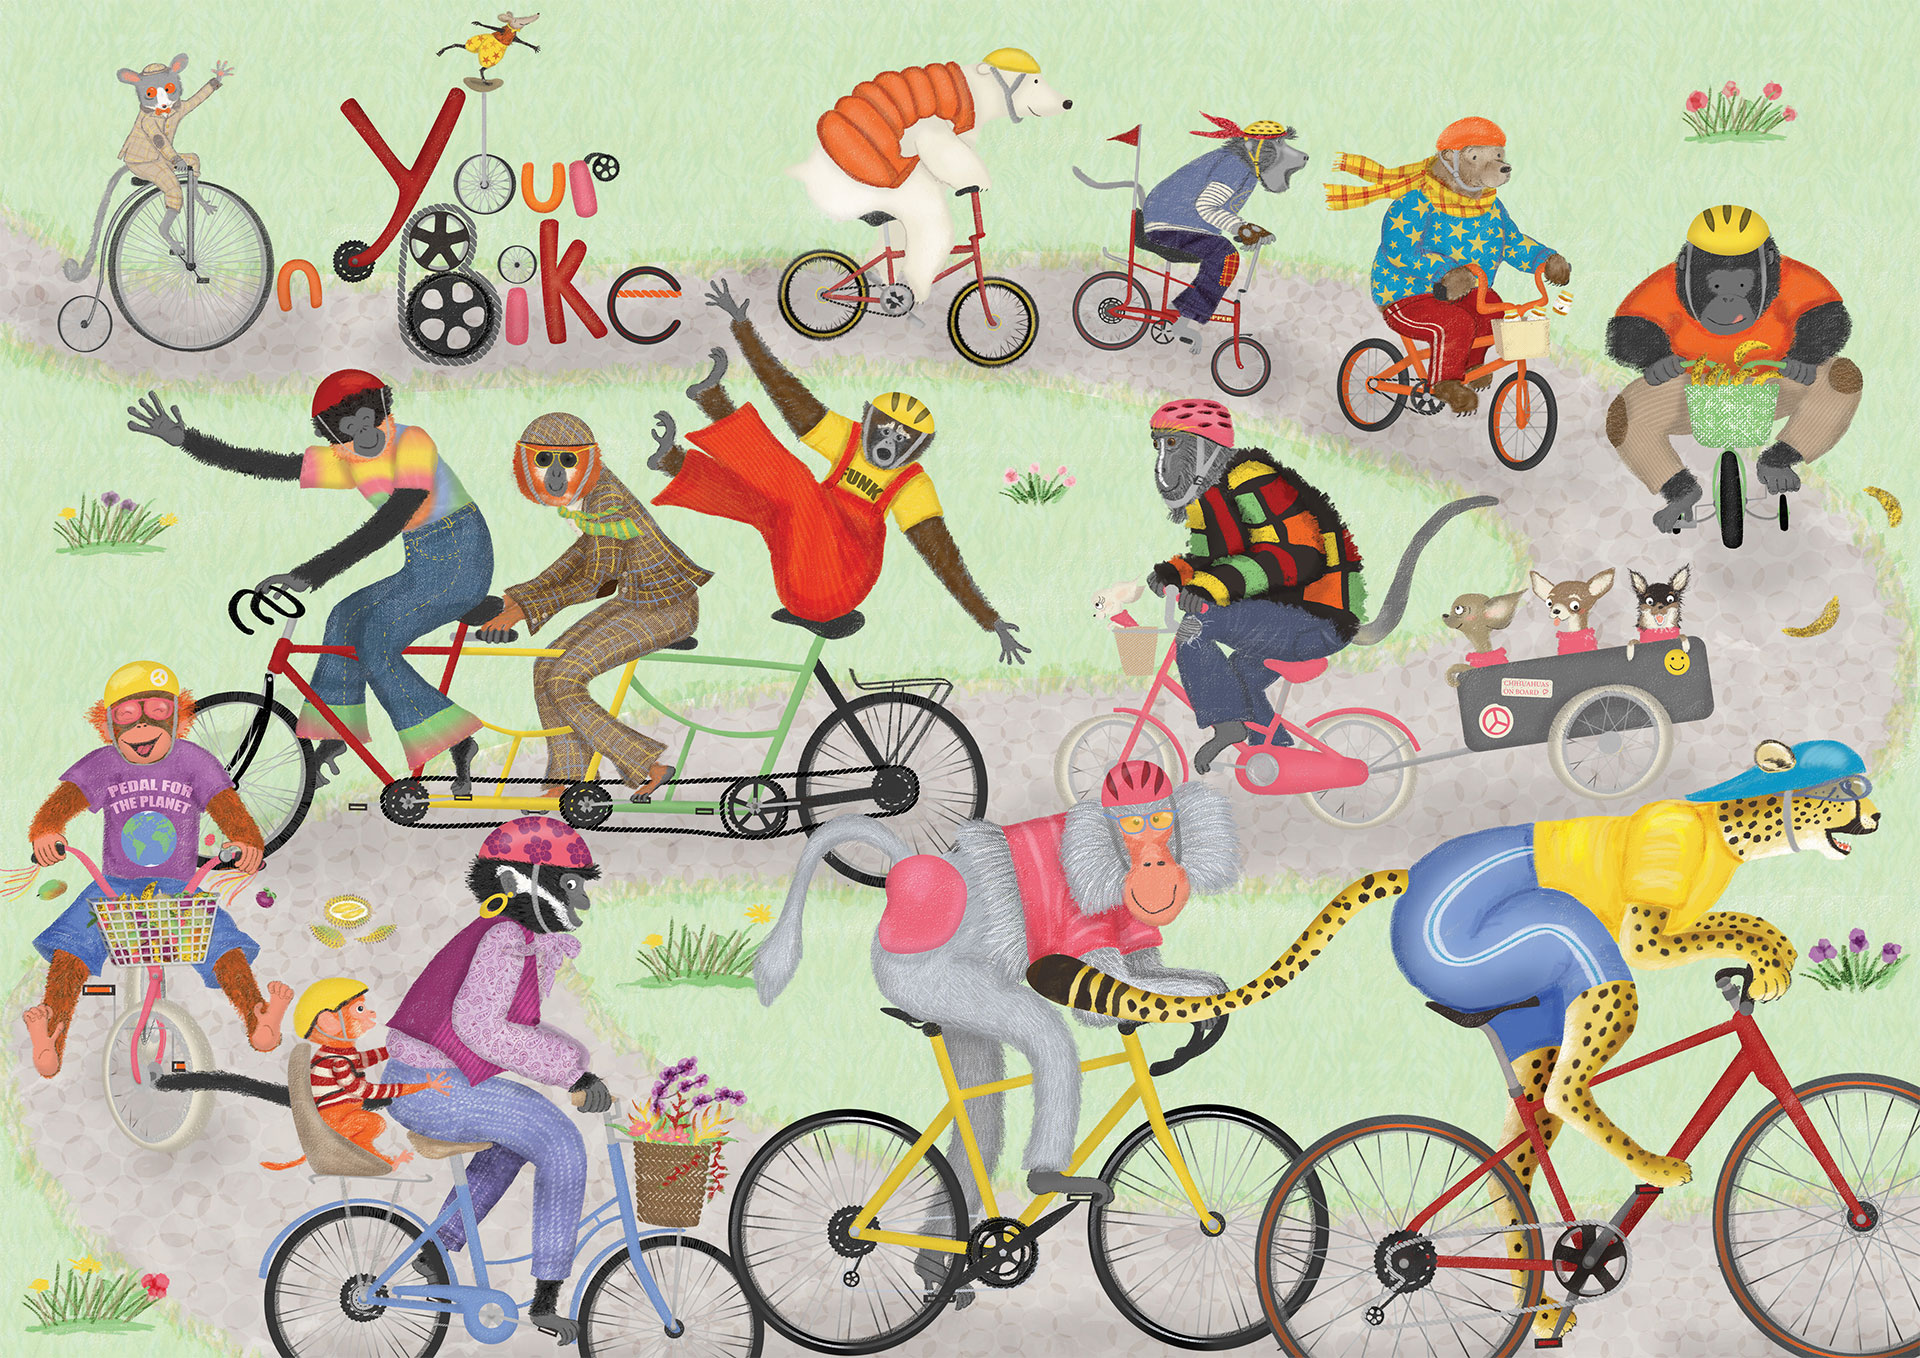 Monkeys, bears and other animals riding bicycles